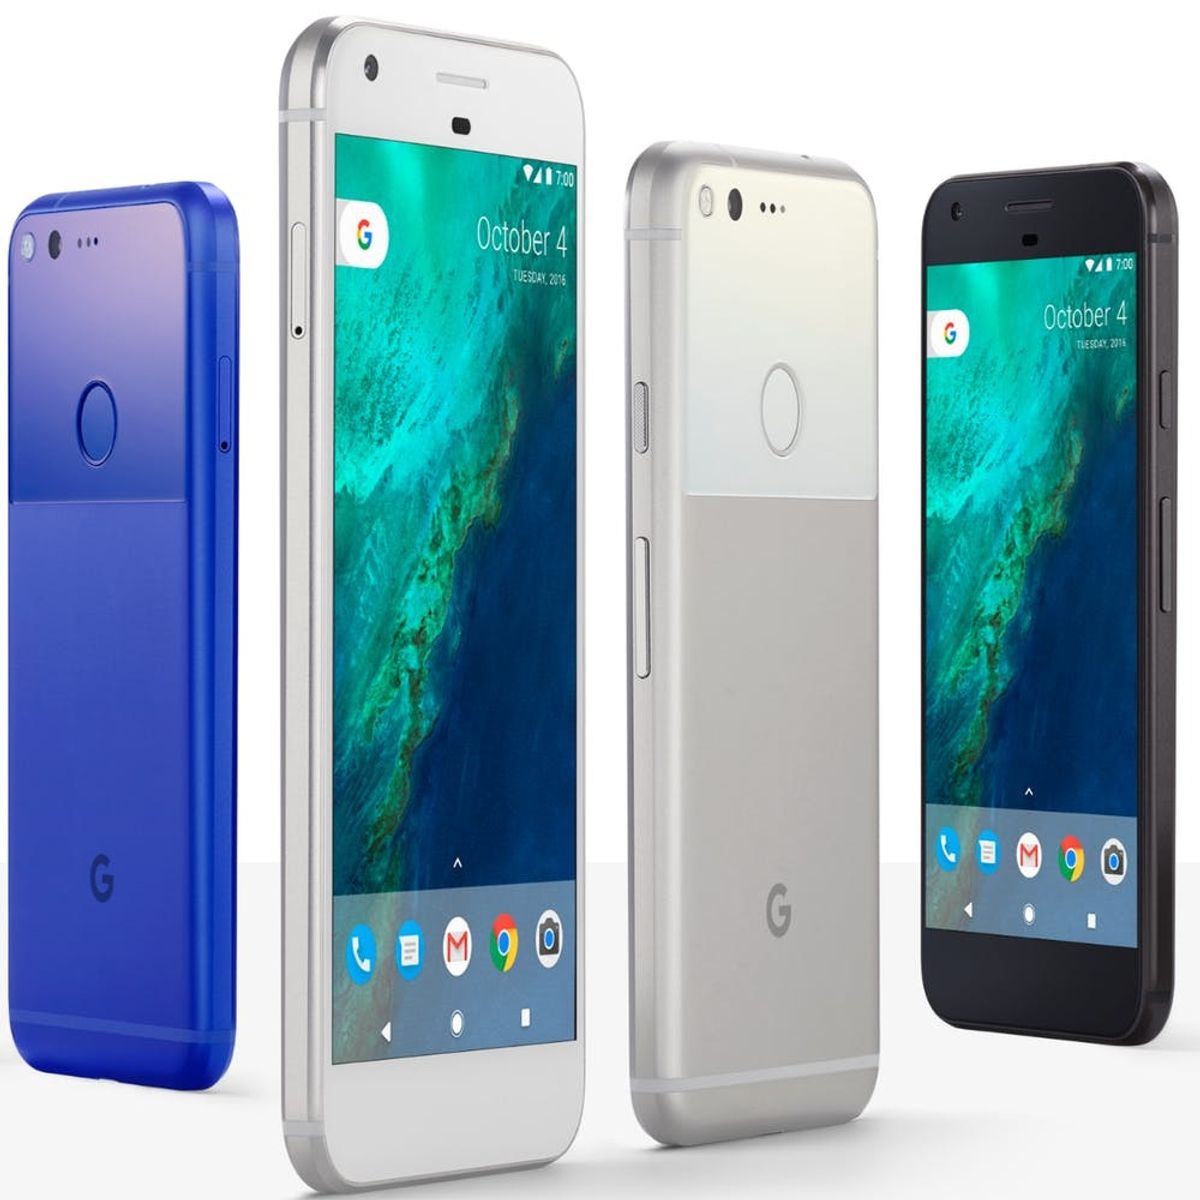 Google Just Confirmed the Pixel Phone, and It Is Gorgeous